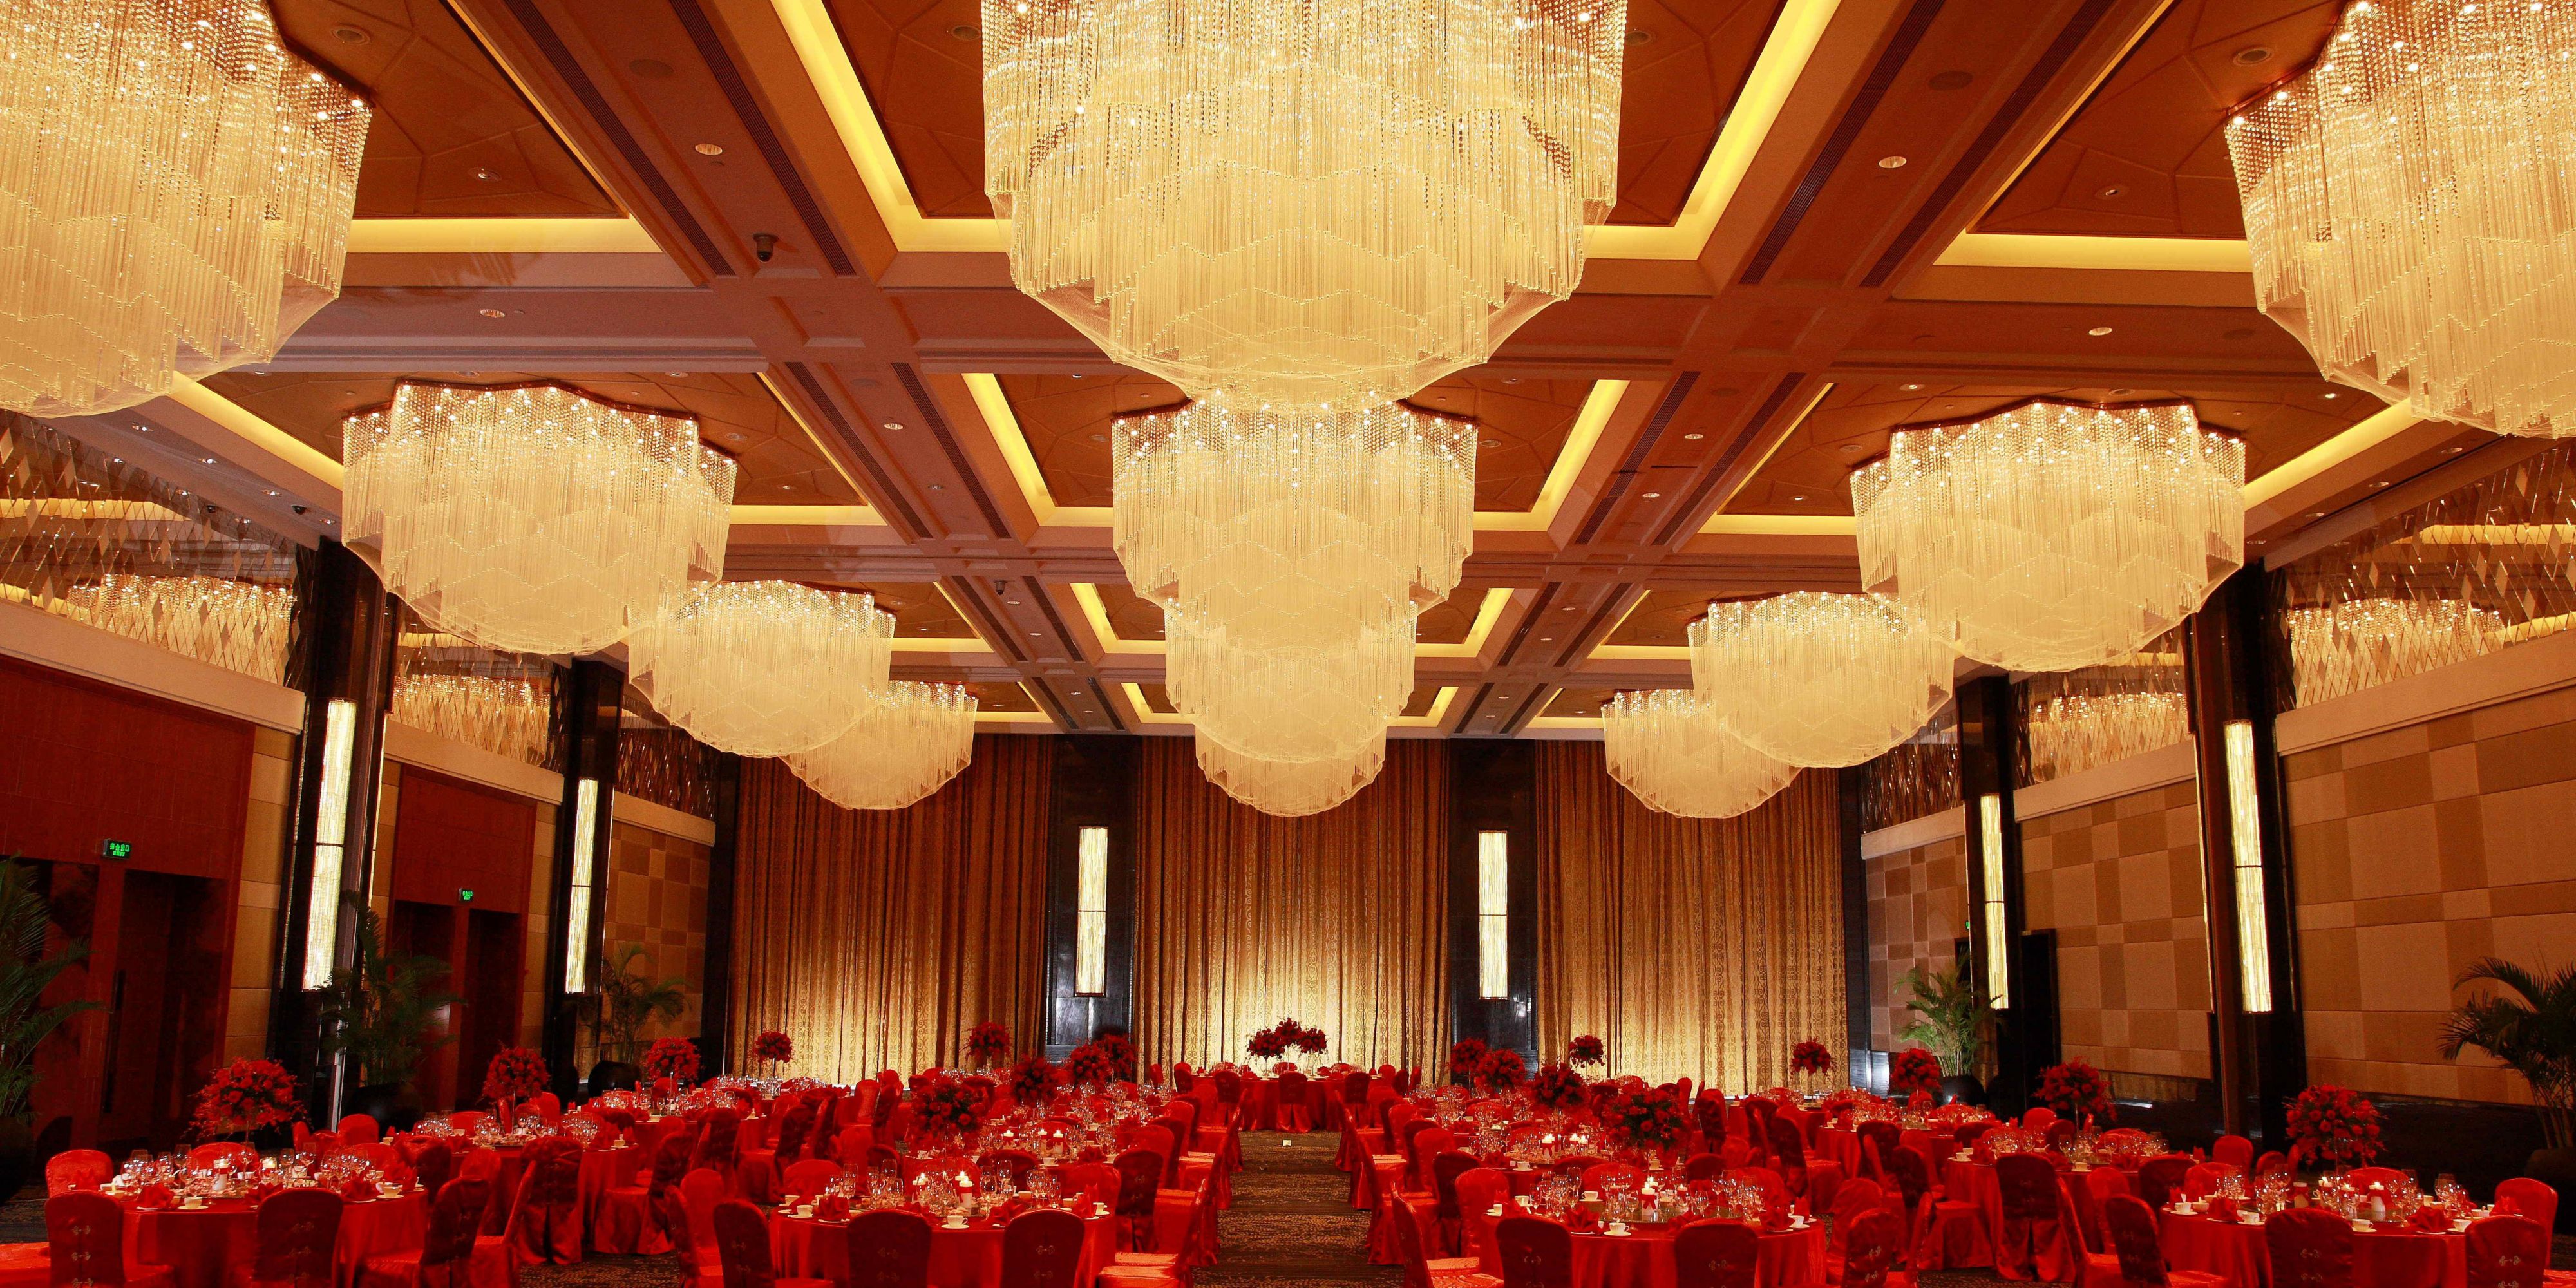 Whether you are into the splendid settings of a traditional Chinese wedding banquet, or a graceful Western style wedding reception, Intercontinental Foshan fulflls all that you would expect to have on the perfect wedding day.
For wedding inquiries, please contact our Wedding Specialist:0757-8626 8888 ext.6331